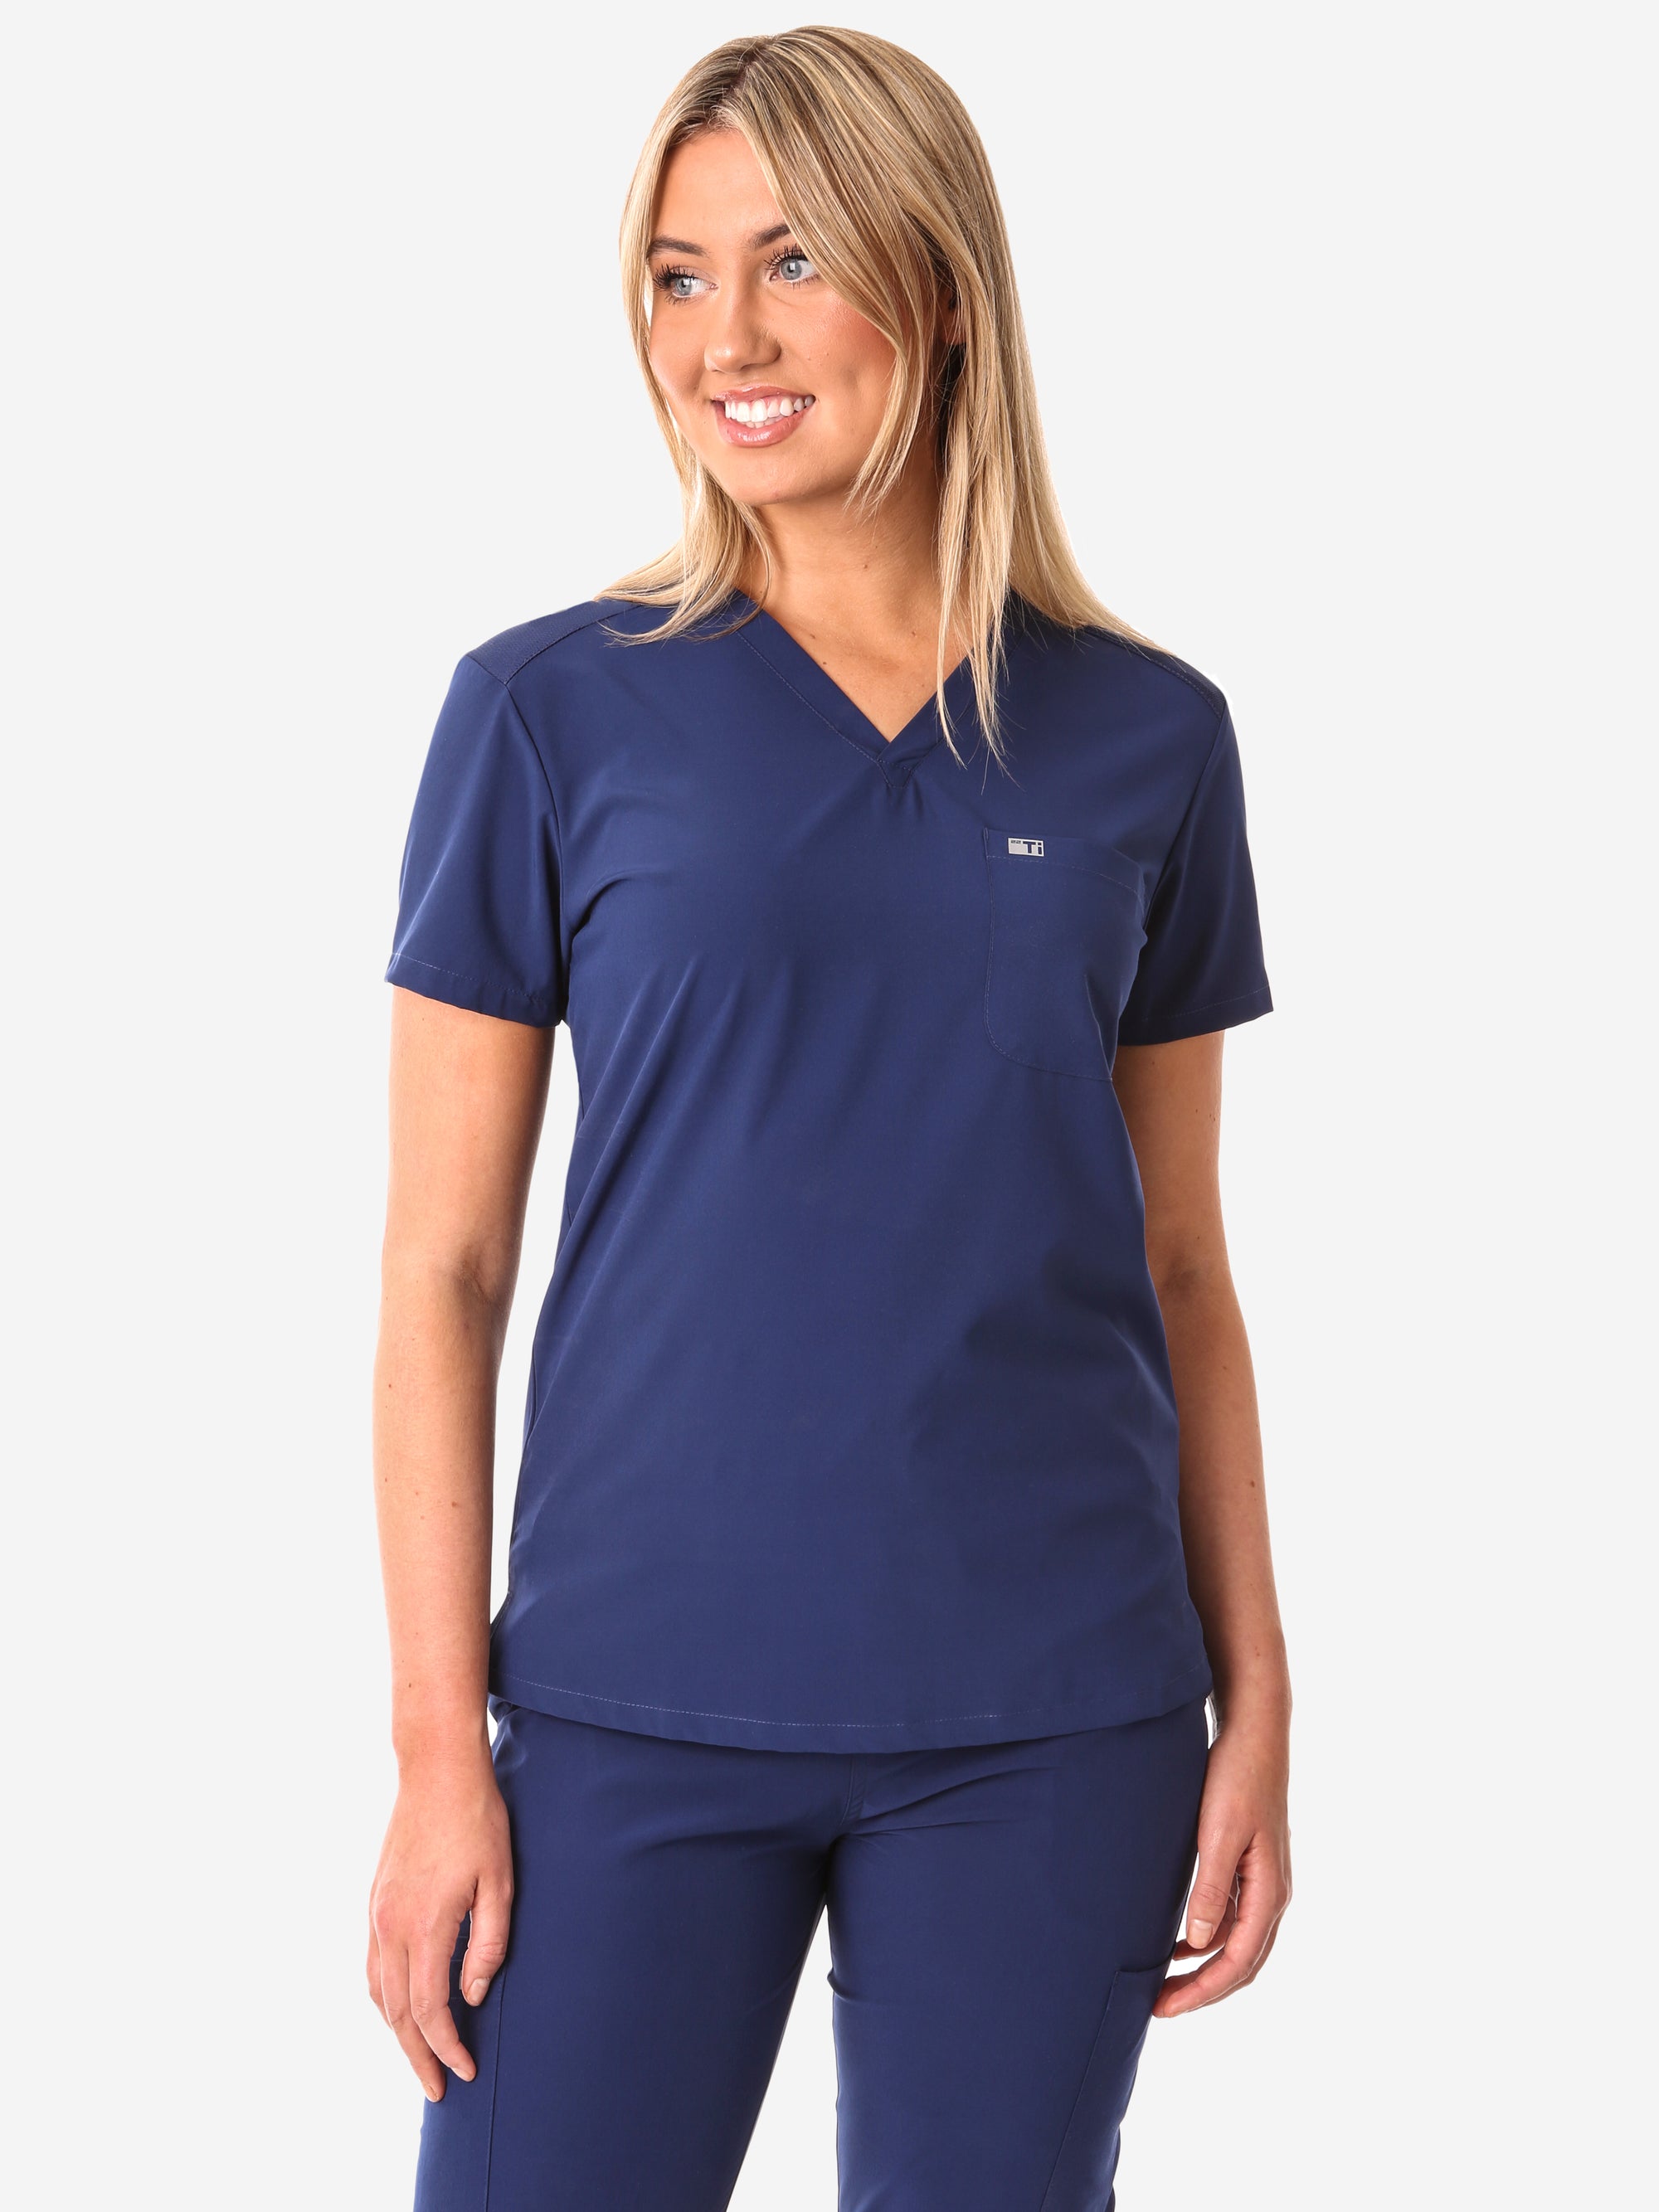 TiScrubs Women's Stretch Navy Blue One-Pocket Scrub Top Untucked Front View Top Only